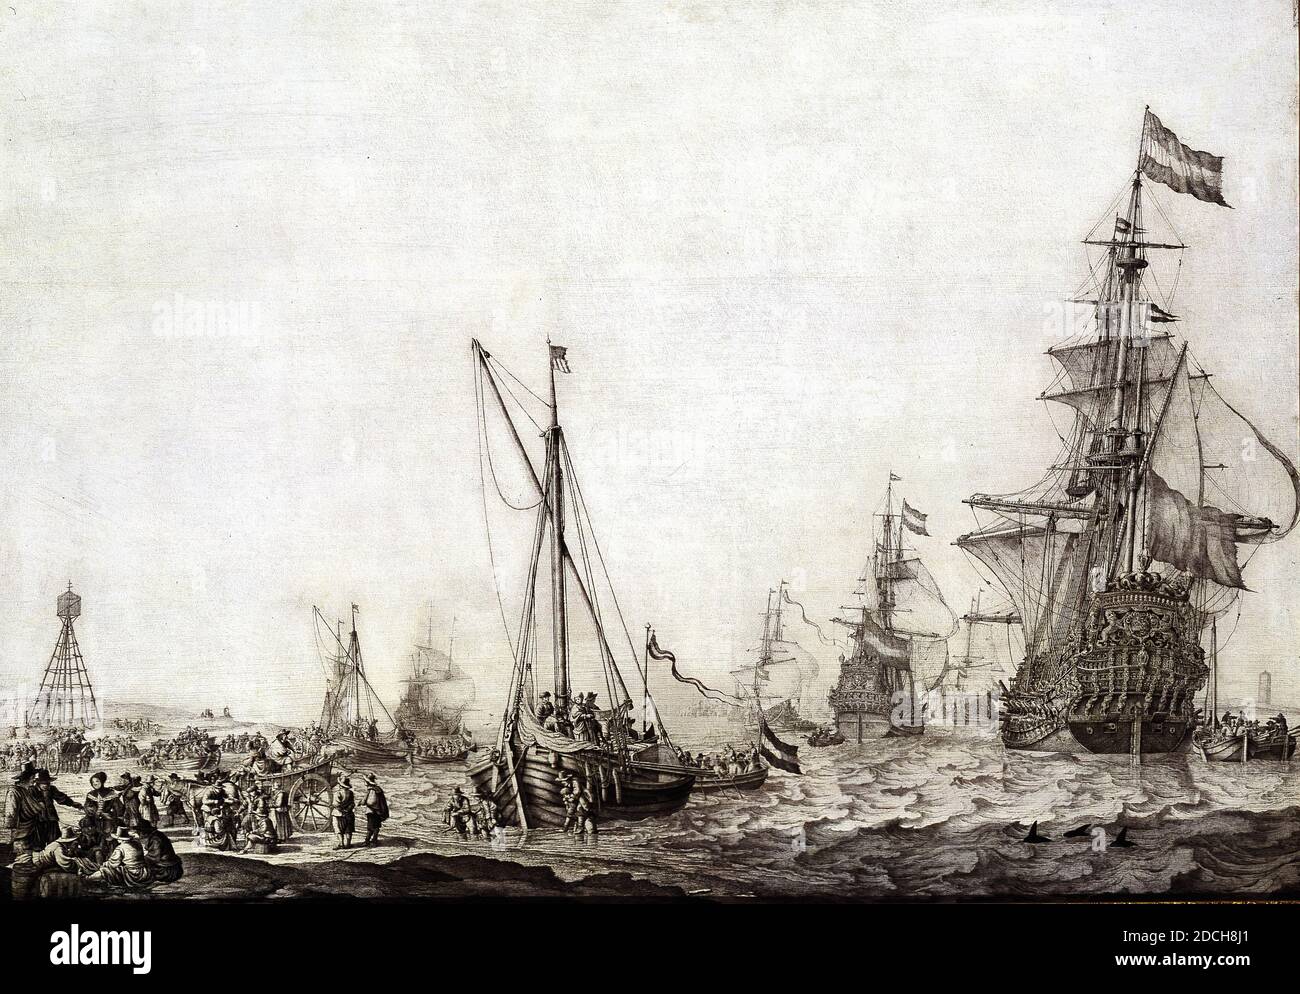 Departure of the Dutch Fleet the 9th of June 1645, drawing, Willem van de Velde the Elder, c. 1650, Signature front, bottom center: WVVeld [e], panel, Indian ink, signed, Carrier: 74.3 x 105 , 4 x 0.4cm 743 x 1054 x 4mm, With frame: 96.3 × 126 × 7.8cm 963 × 1260 × 78mm, seascape, history painting, sailing ship, Brush drawing depicting a seascape: sailing out of the Dutch fleet van de Vlieree on 9 June 1645. On the right the admiral ship Brederode sails from Witte de With, preceded by three ships, including the vice admiral ship the House of Nassau commanded by Joris van Cats. Left for some Stock Photo